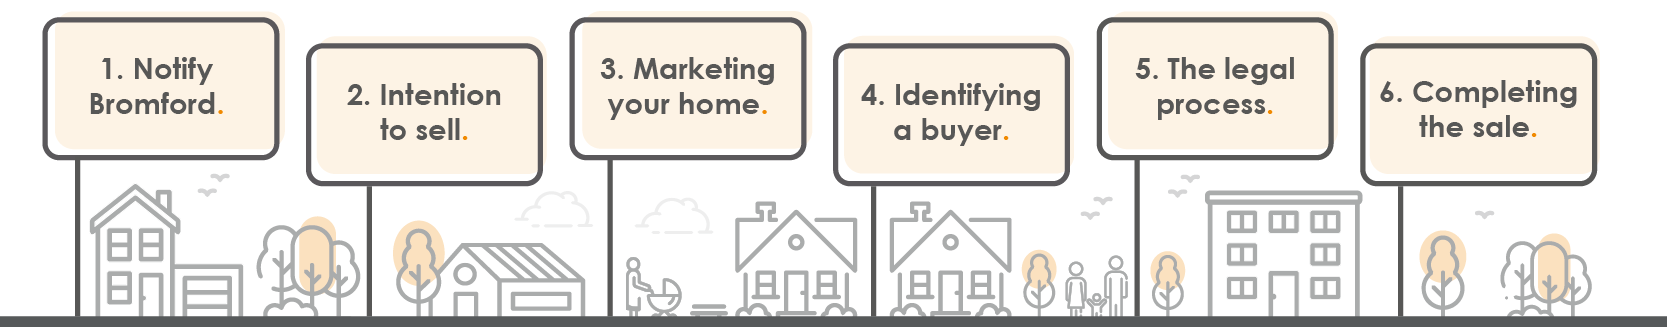 Decorative image. Infographic showing the 6 step process to buying your home.